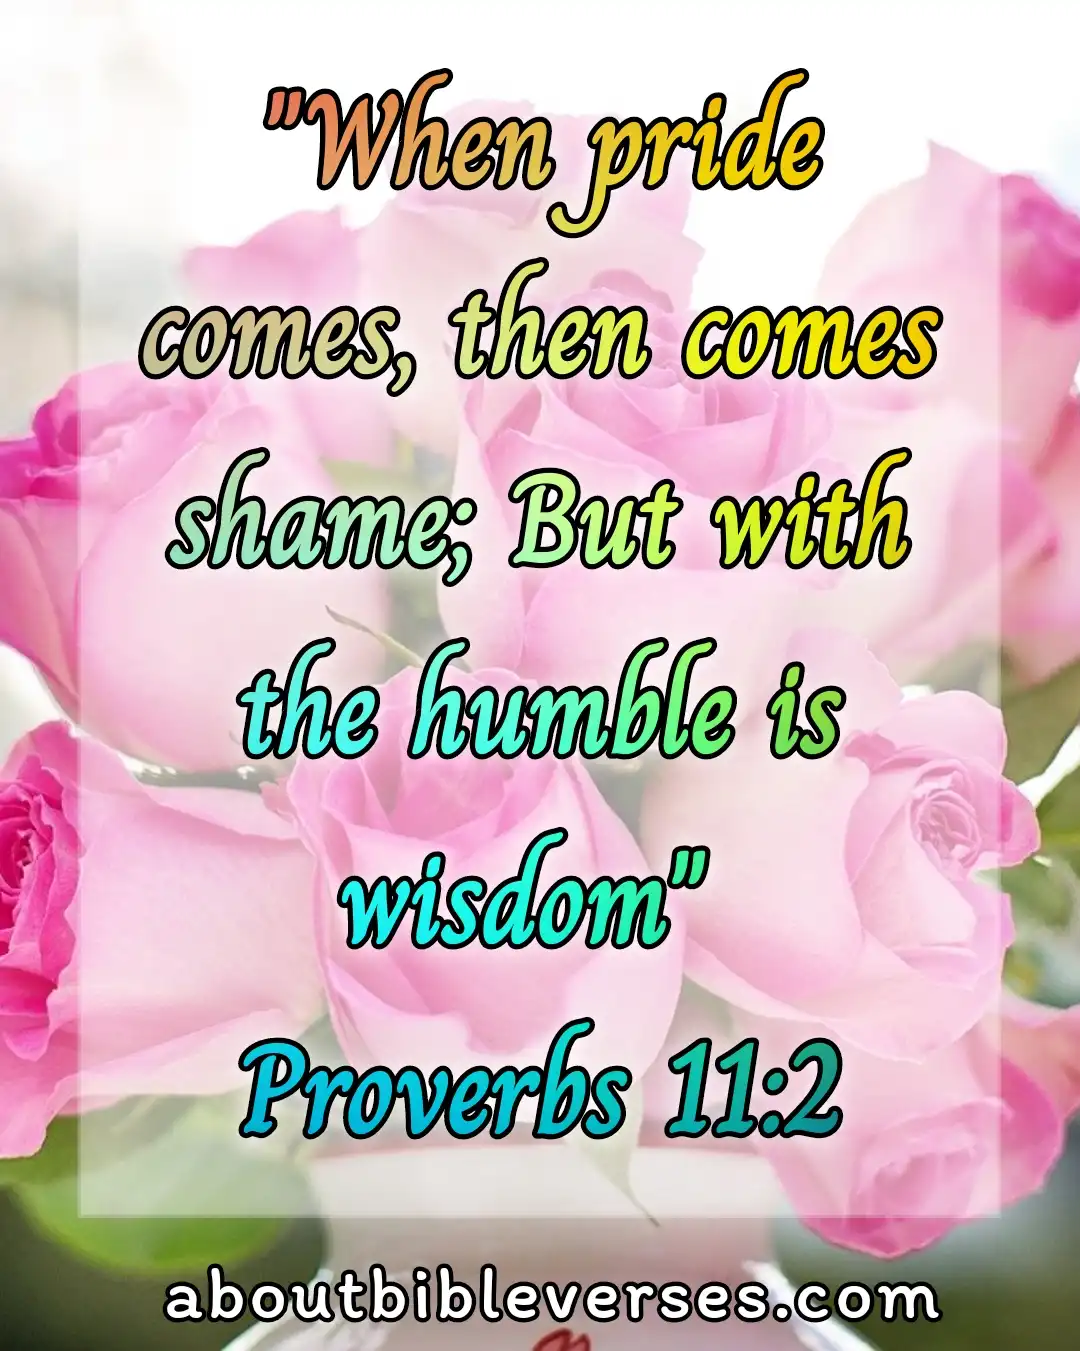 bible verses about wisdom (Proverbs 11:2)